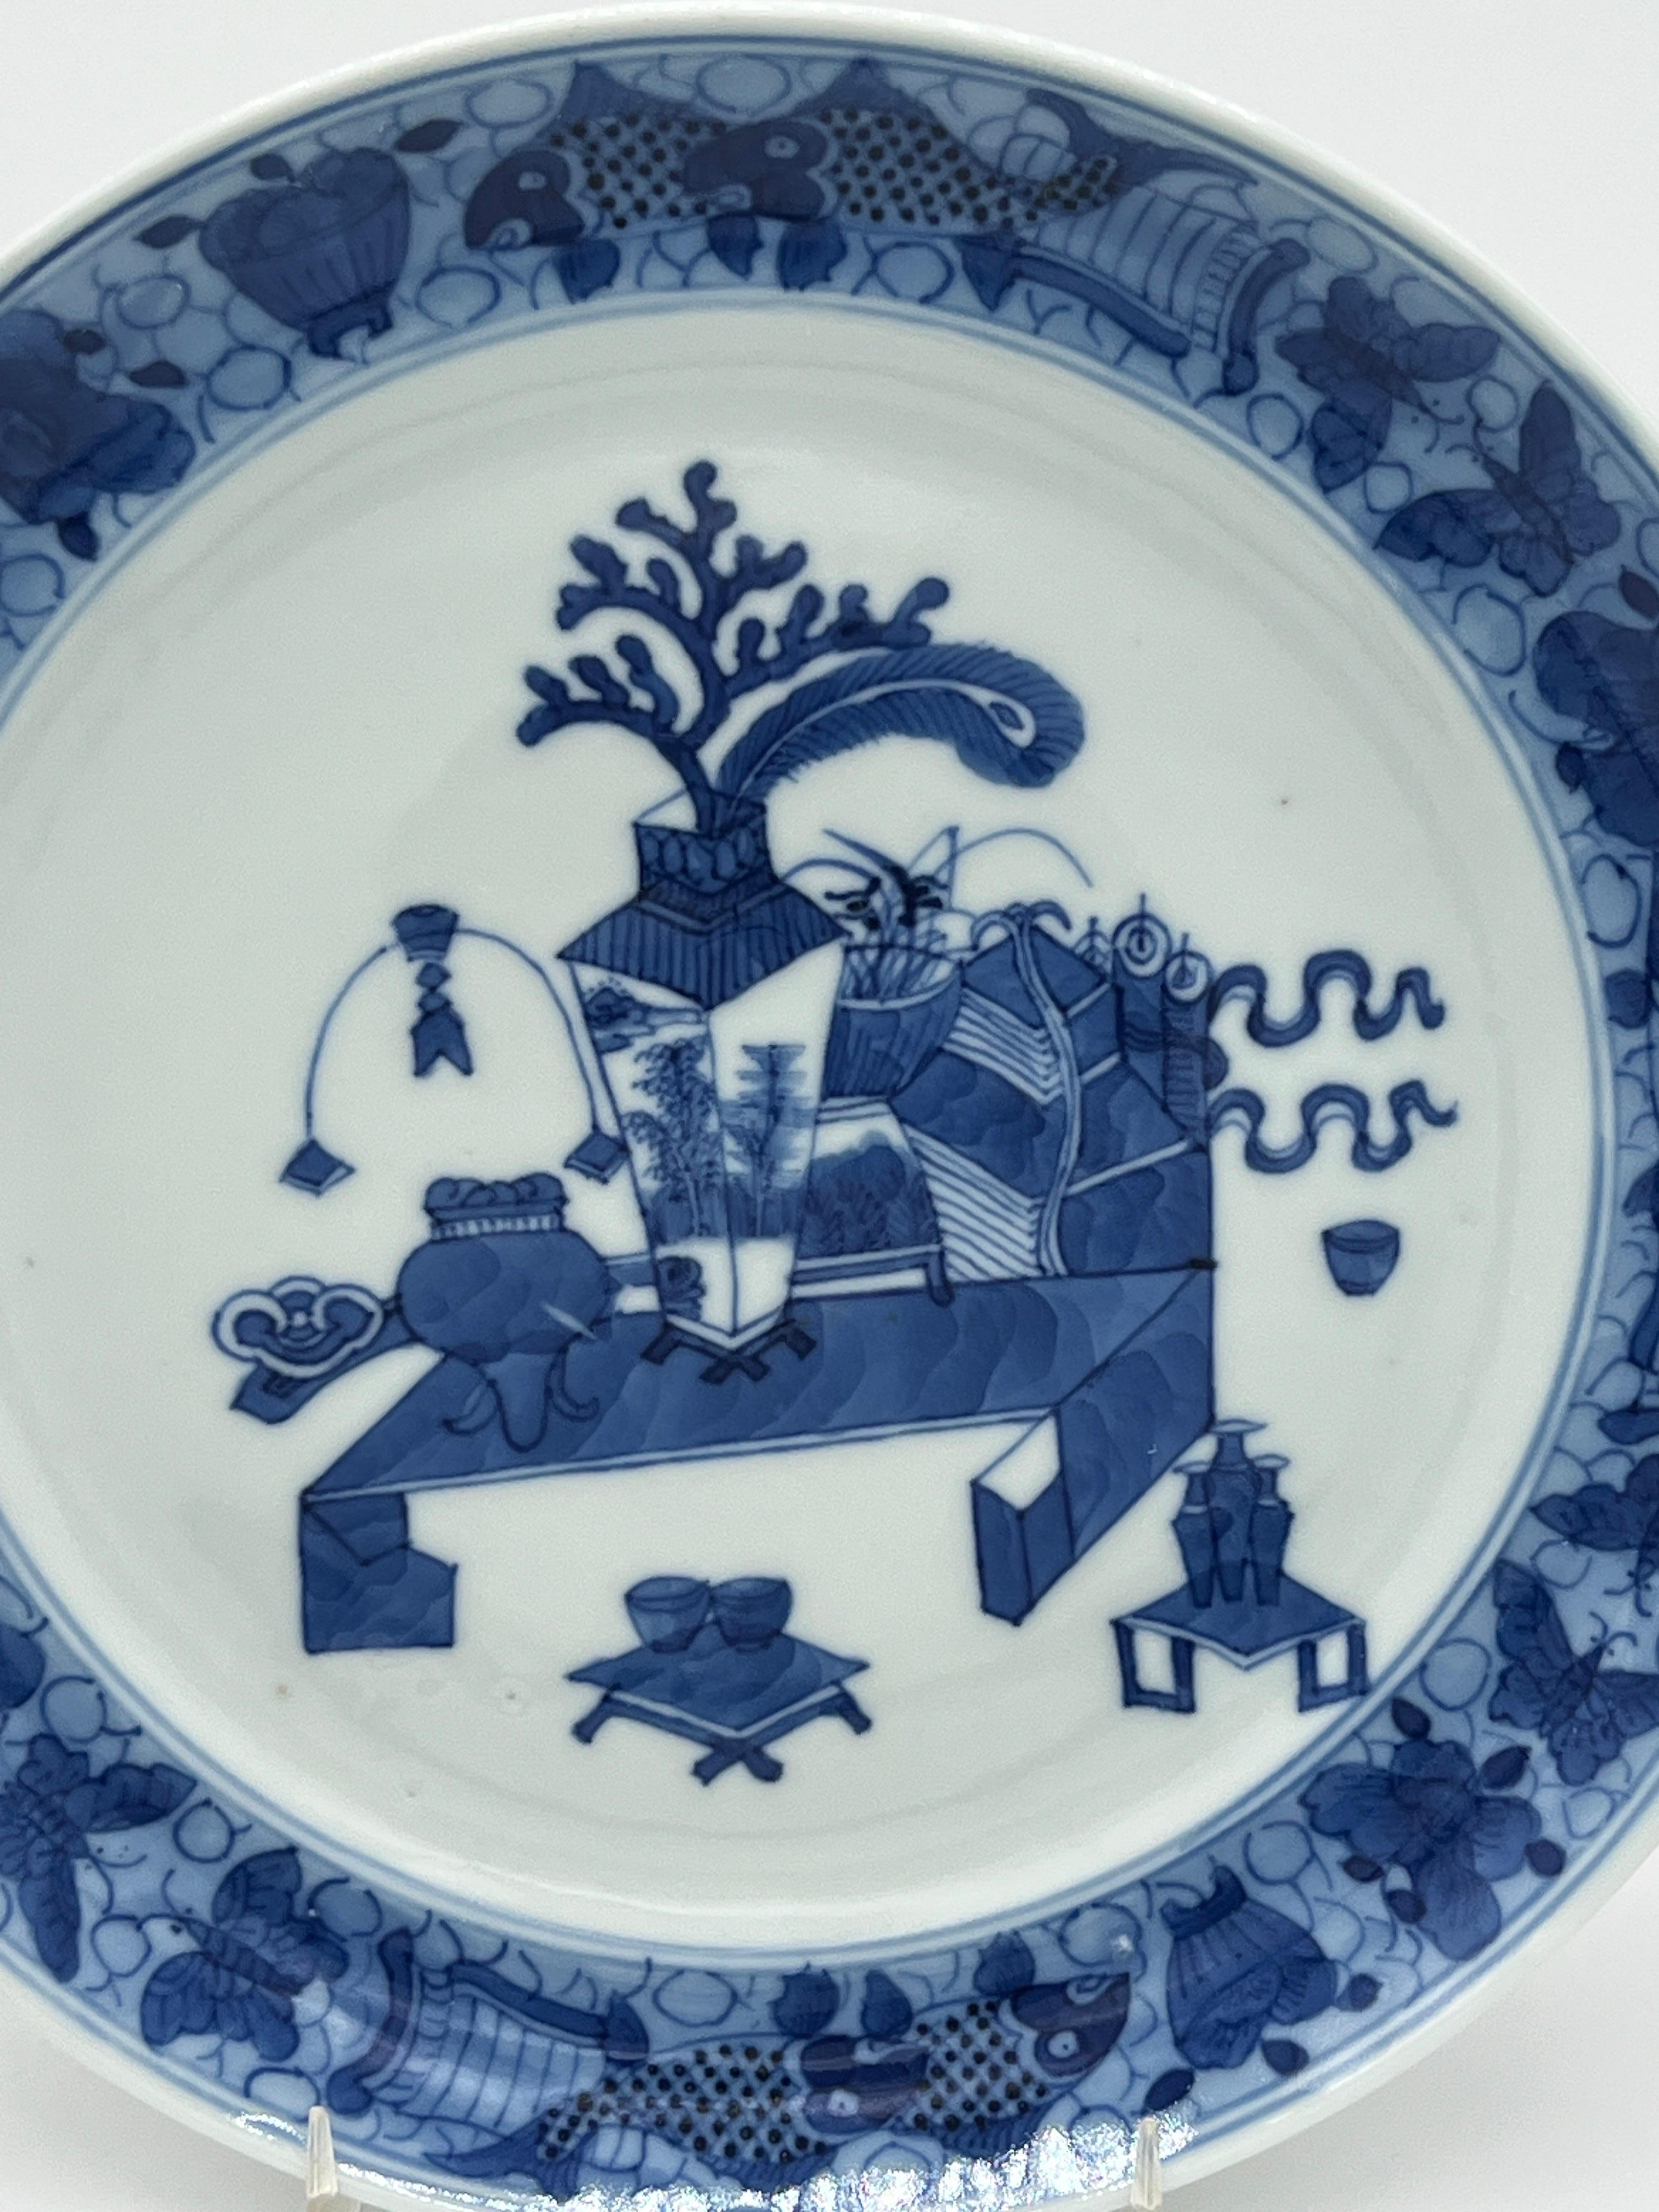 Chinese, circa 1780.

Chinese export blue & white plate, painted with a ‘precious objects’, pattern, with scrolls, censors & teawares, within a border of fish and moths on a scale ground. Unmarked, c.1780